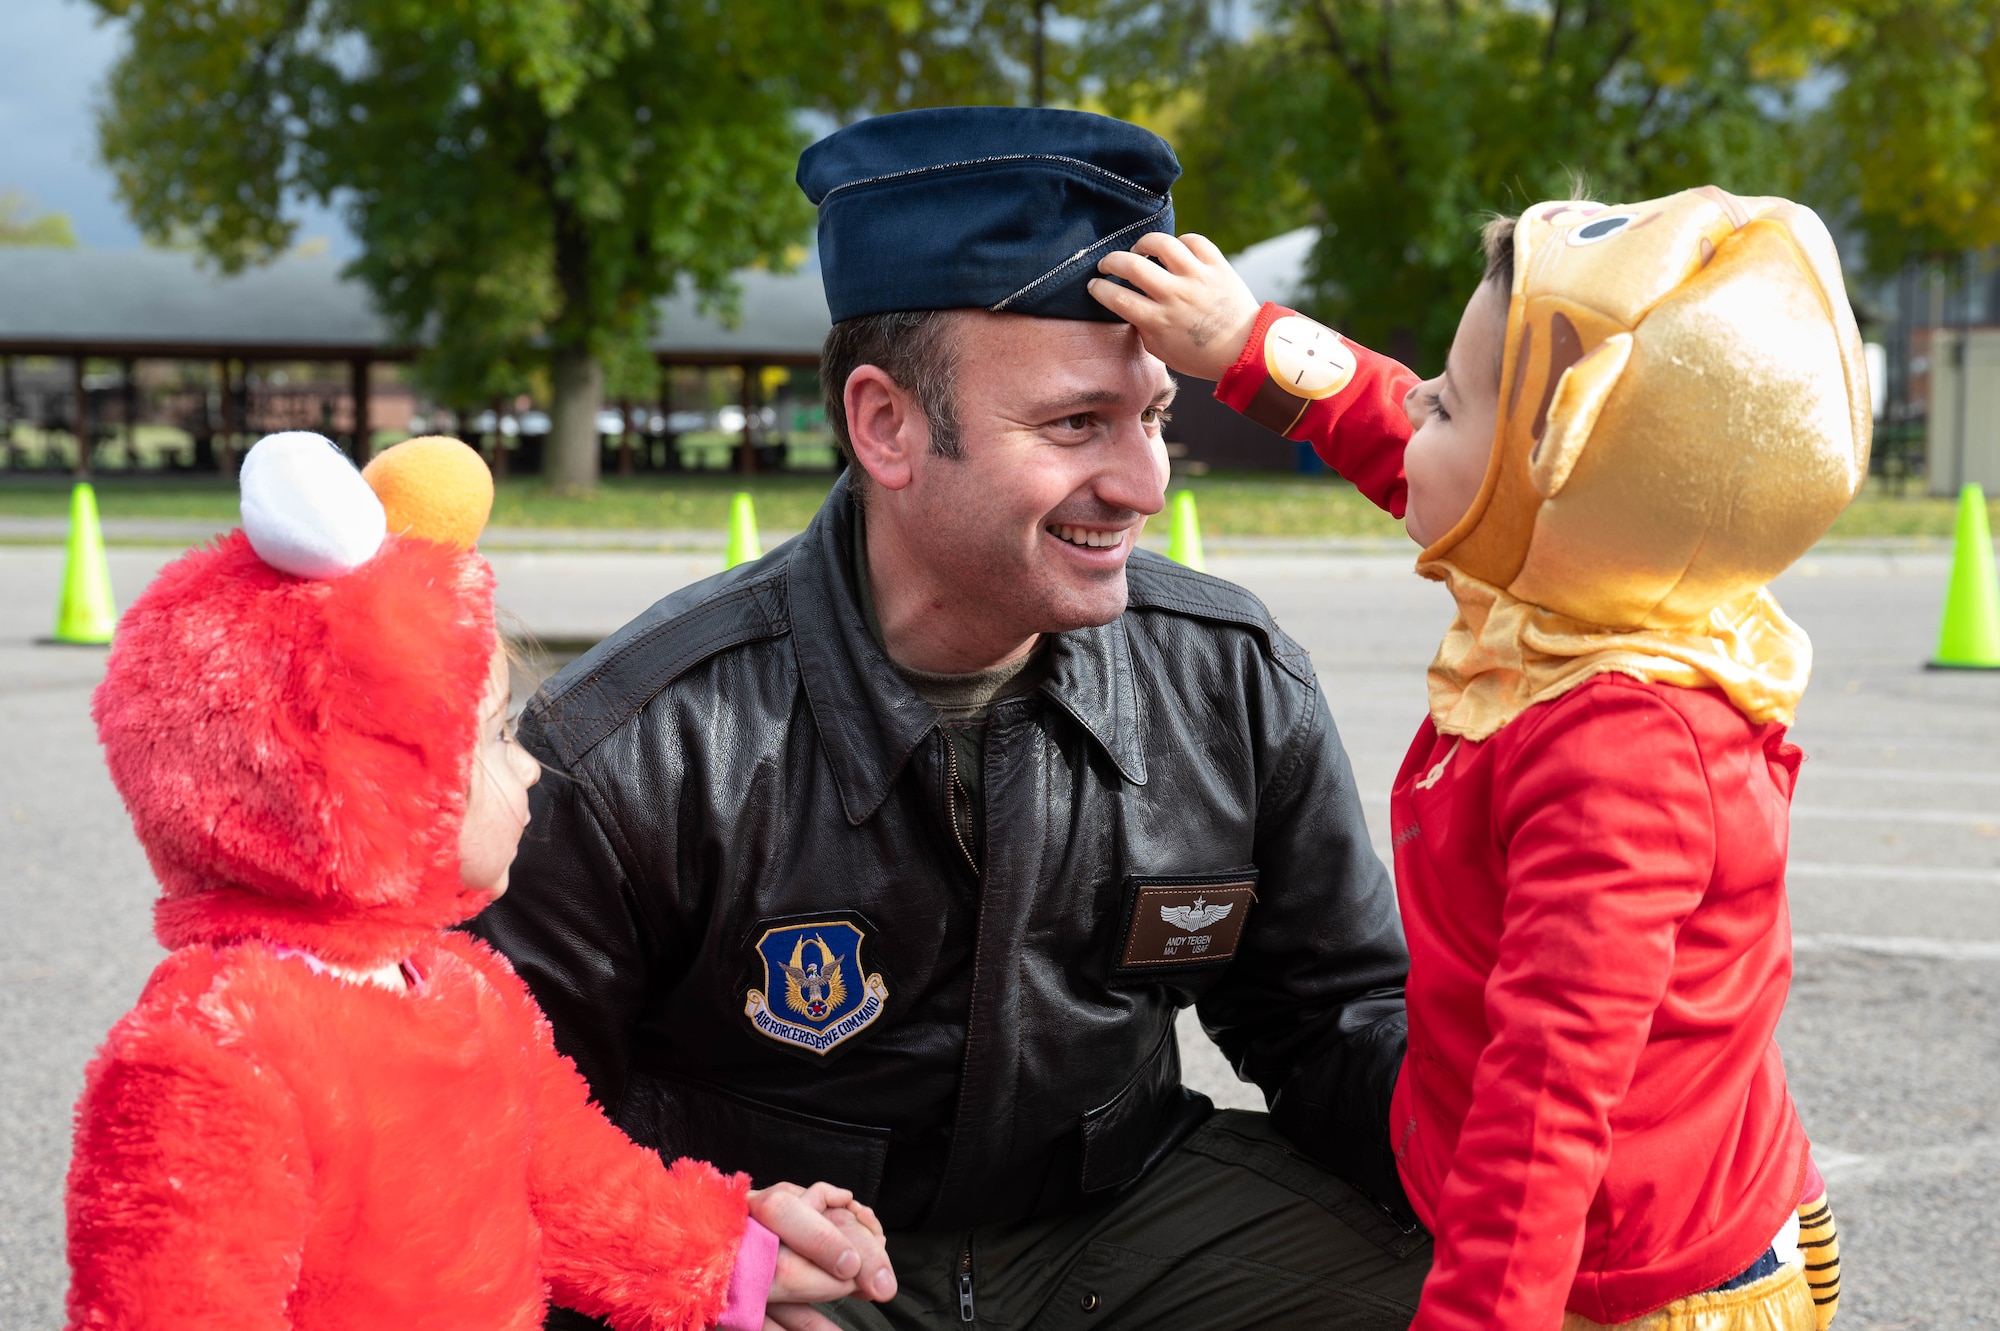 Major Andy Teigen, 96th Airlift Squadron pilot, spends time with his children during a "Trunk or Treat" event on Oct. 14, 2022 at Minneapolis-St. Paul Air Reserve Station, Minnesota. The event was organized by the 934th Airlift Wing Military Family Readiness program, which helps support service member families. (U.S. Air Force photo by Senior Airman Victoriya Tarakanova)